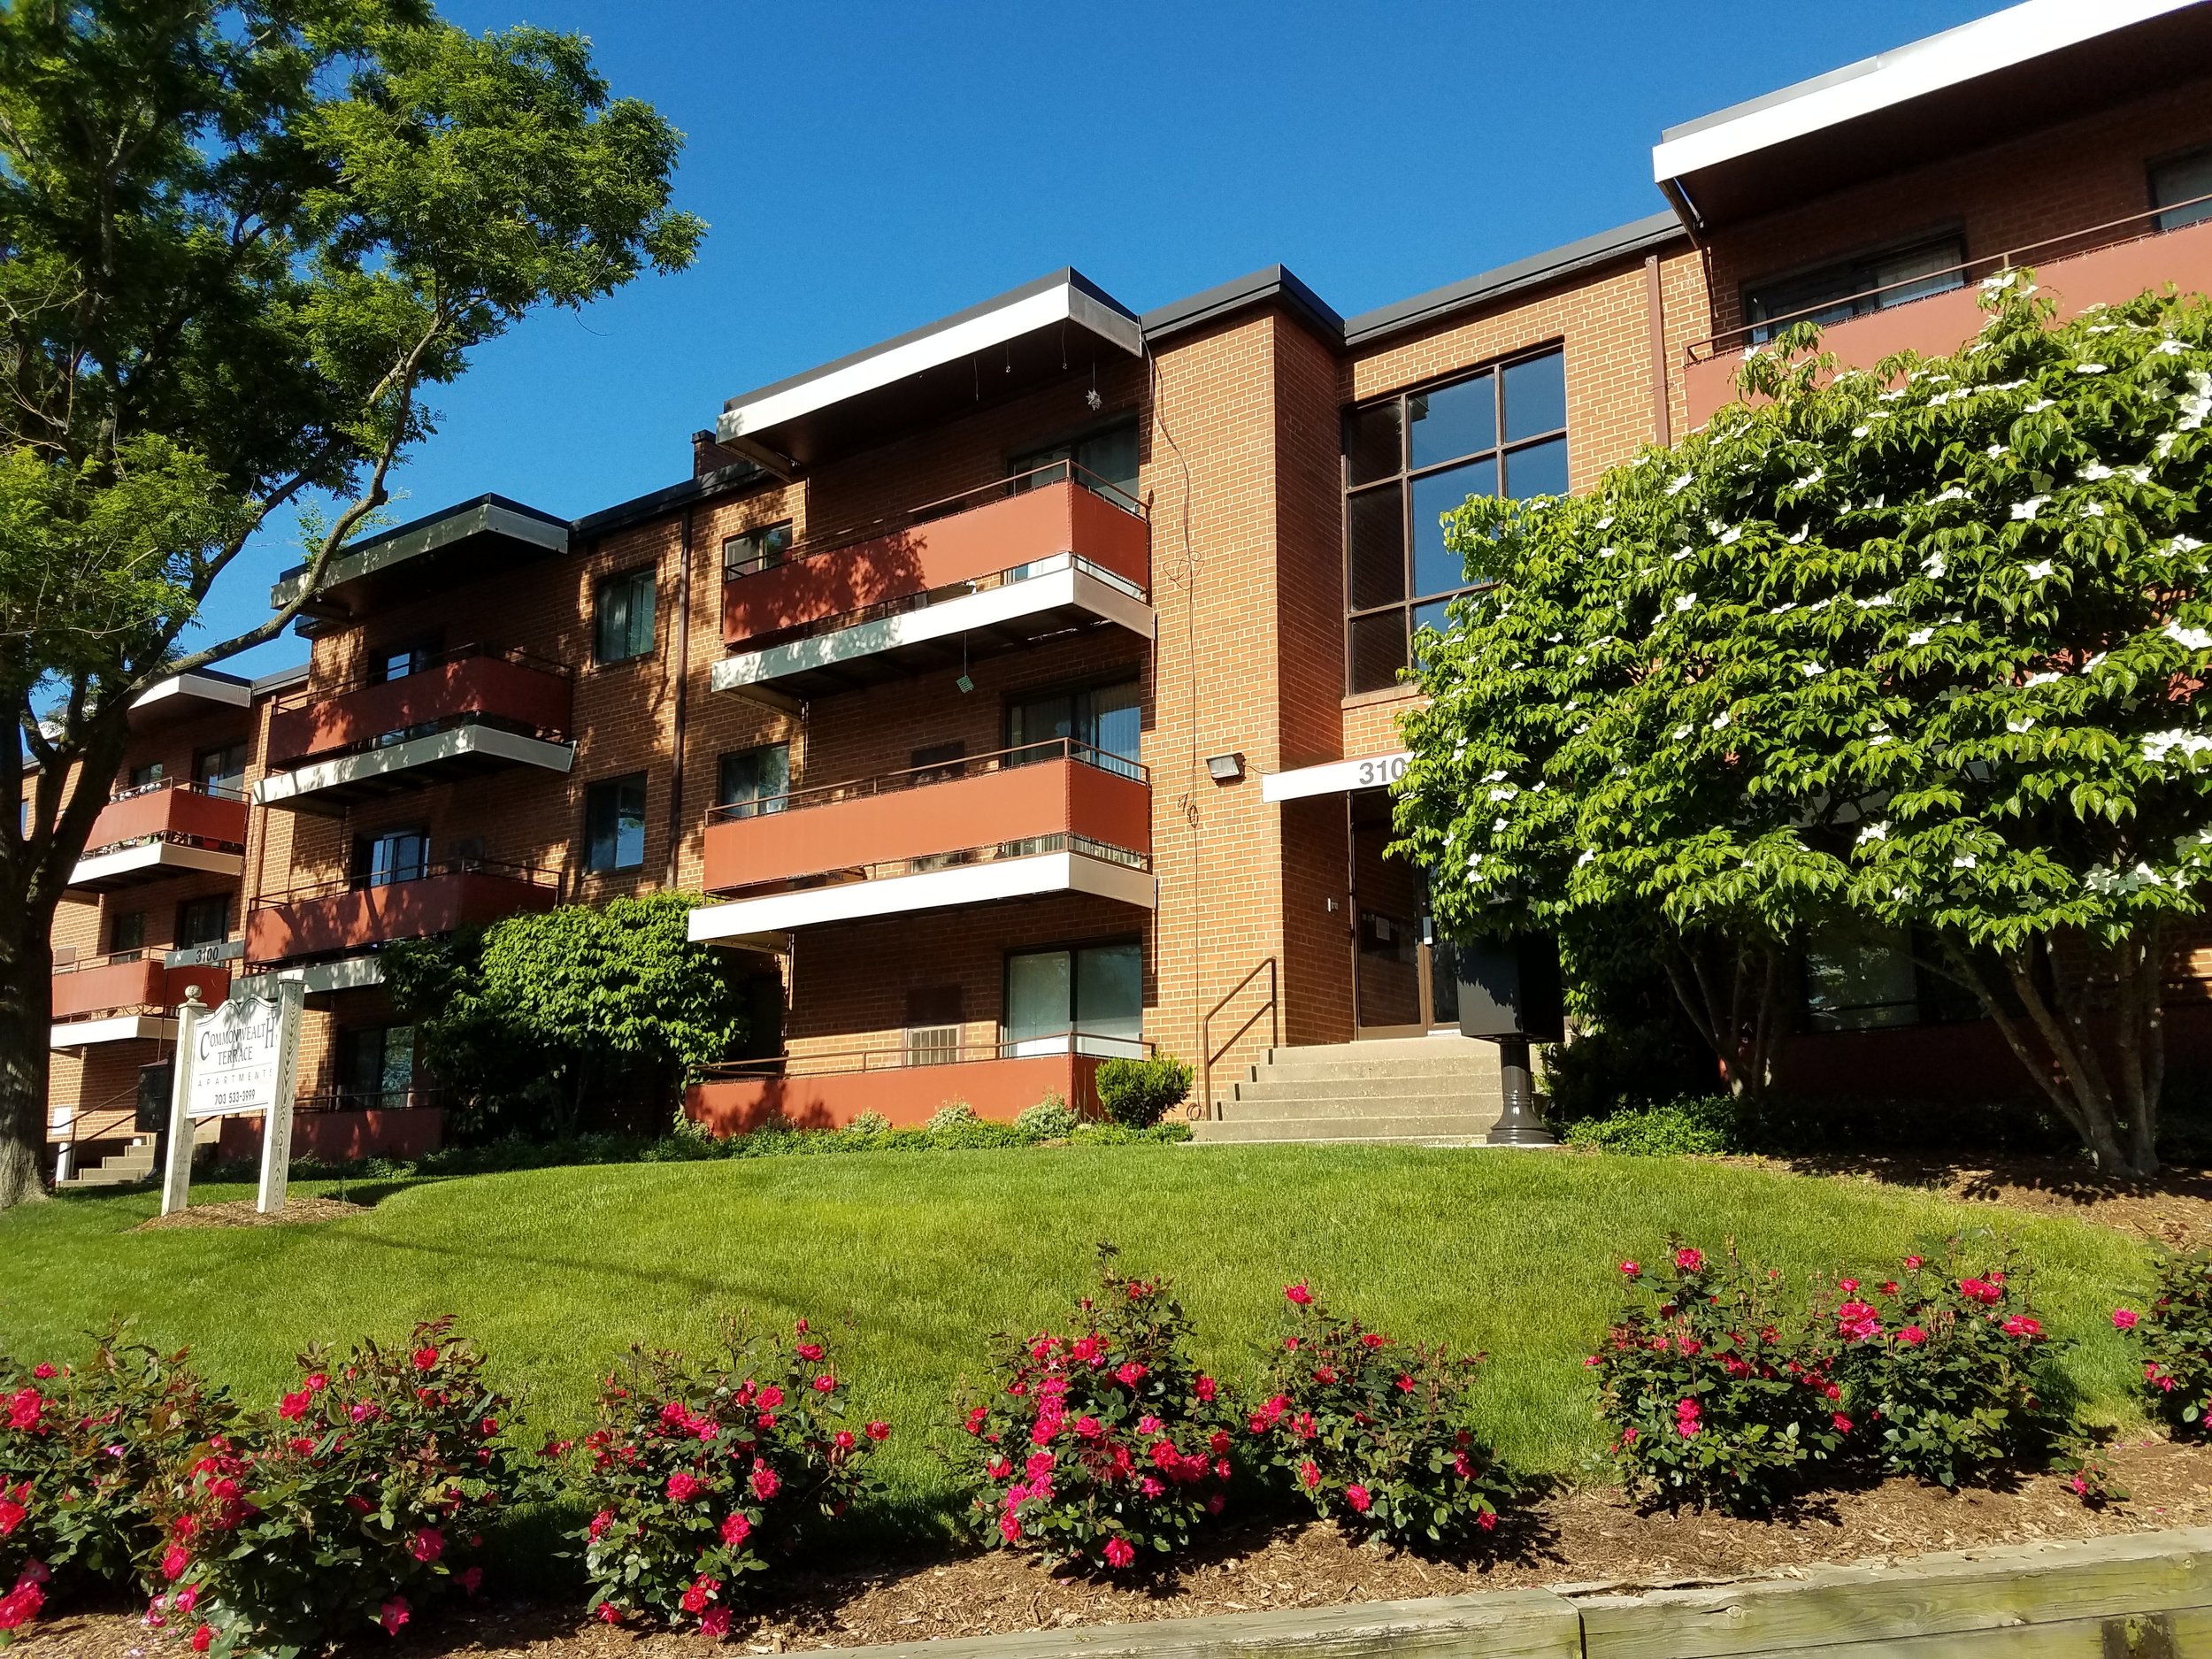 Commonwealth Terrace Apartments